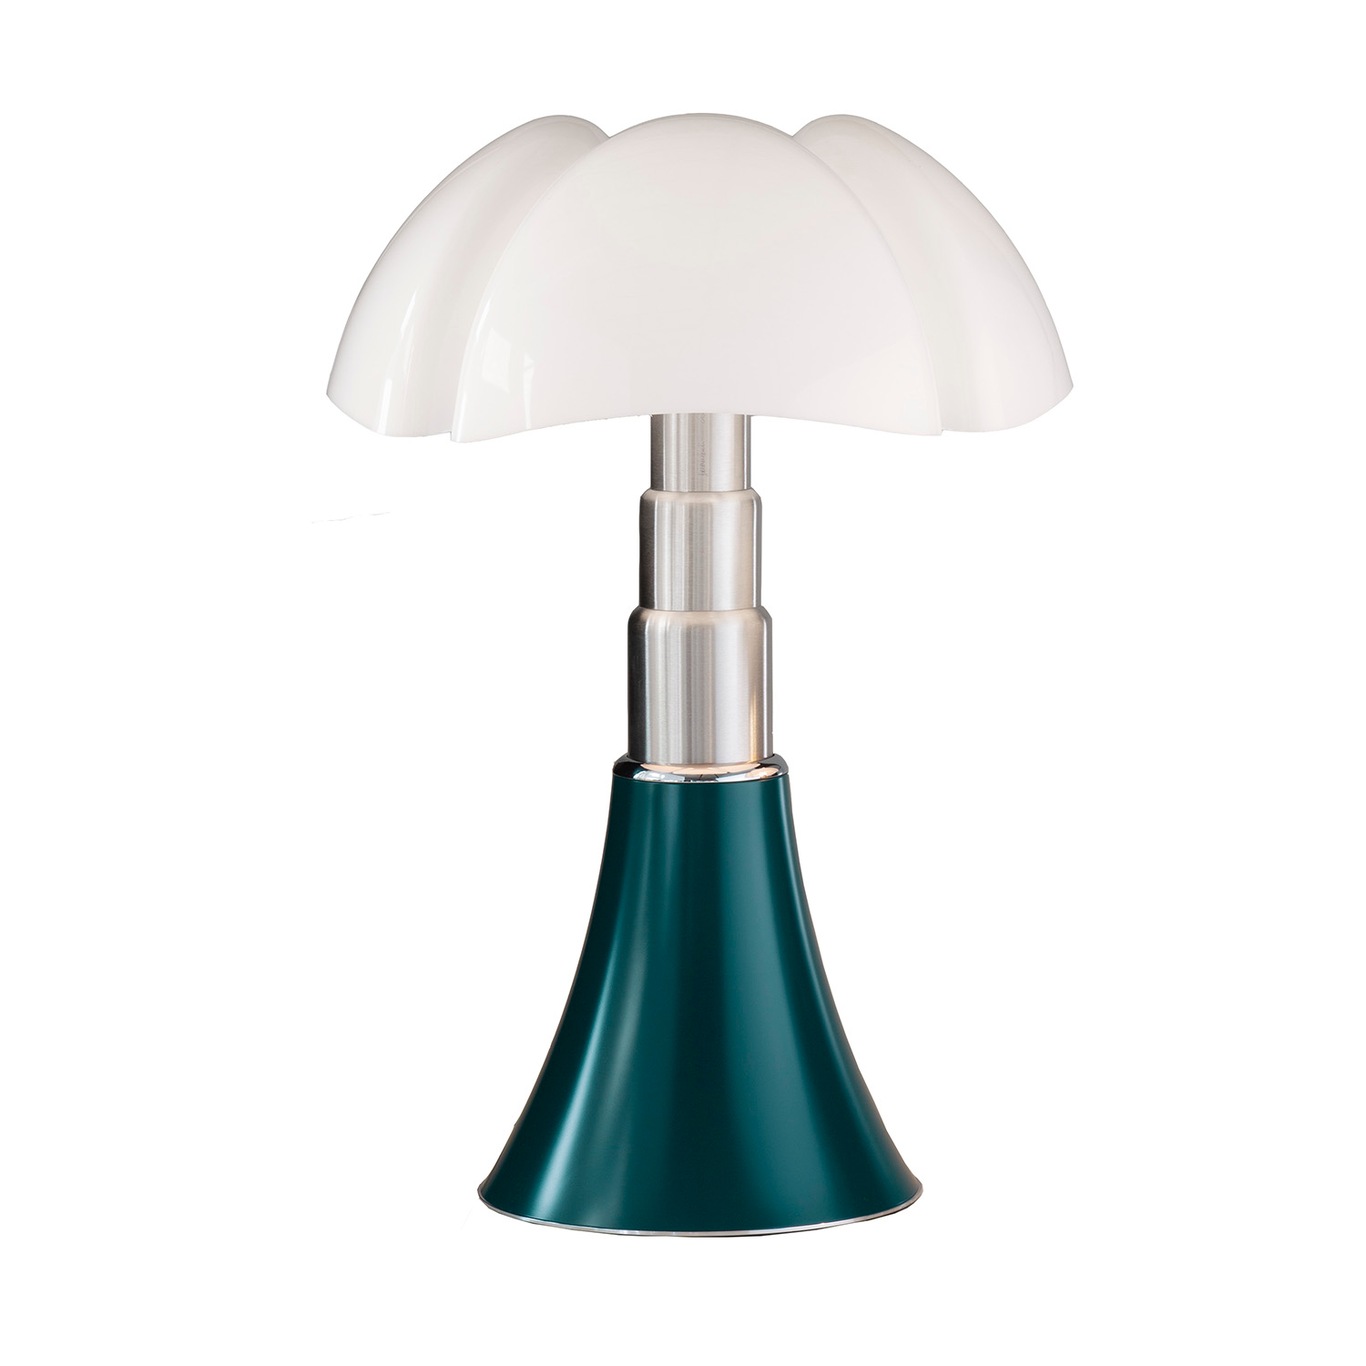 Pipistrello Large Table Lamp, Agave Green